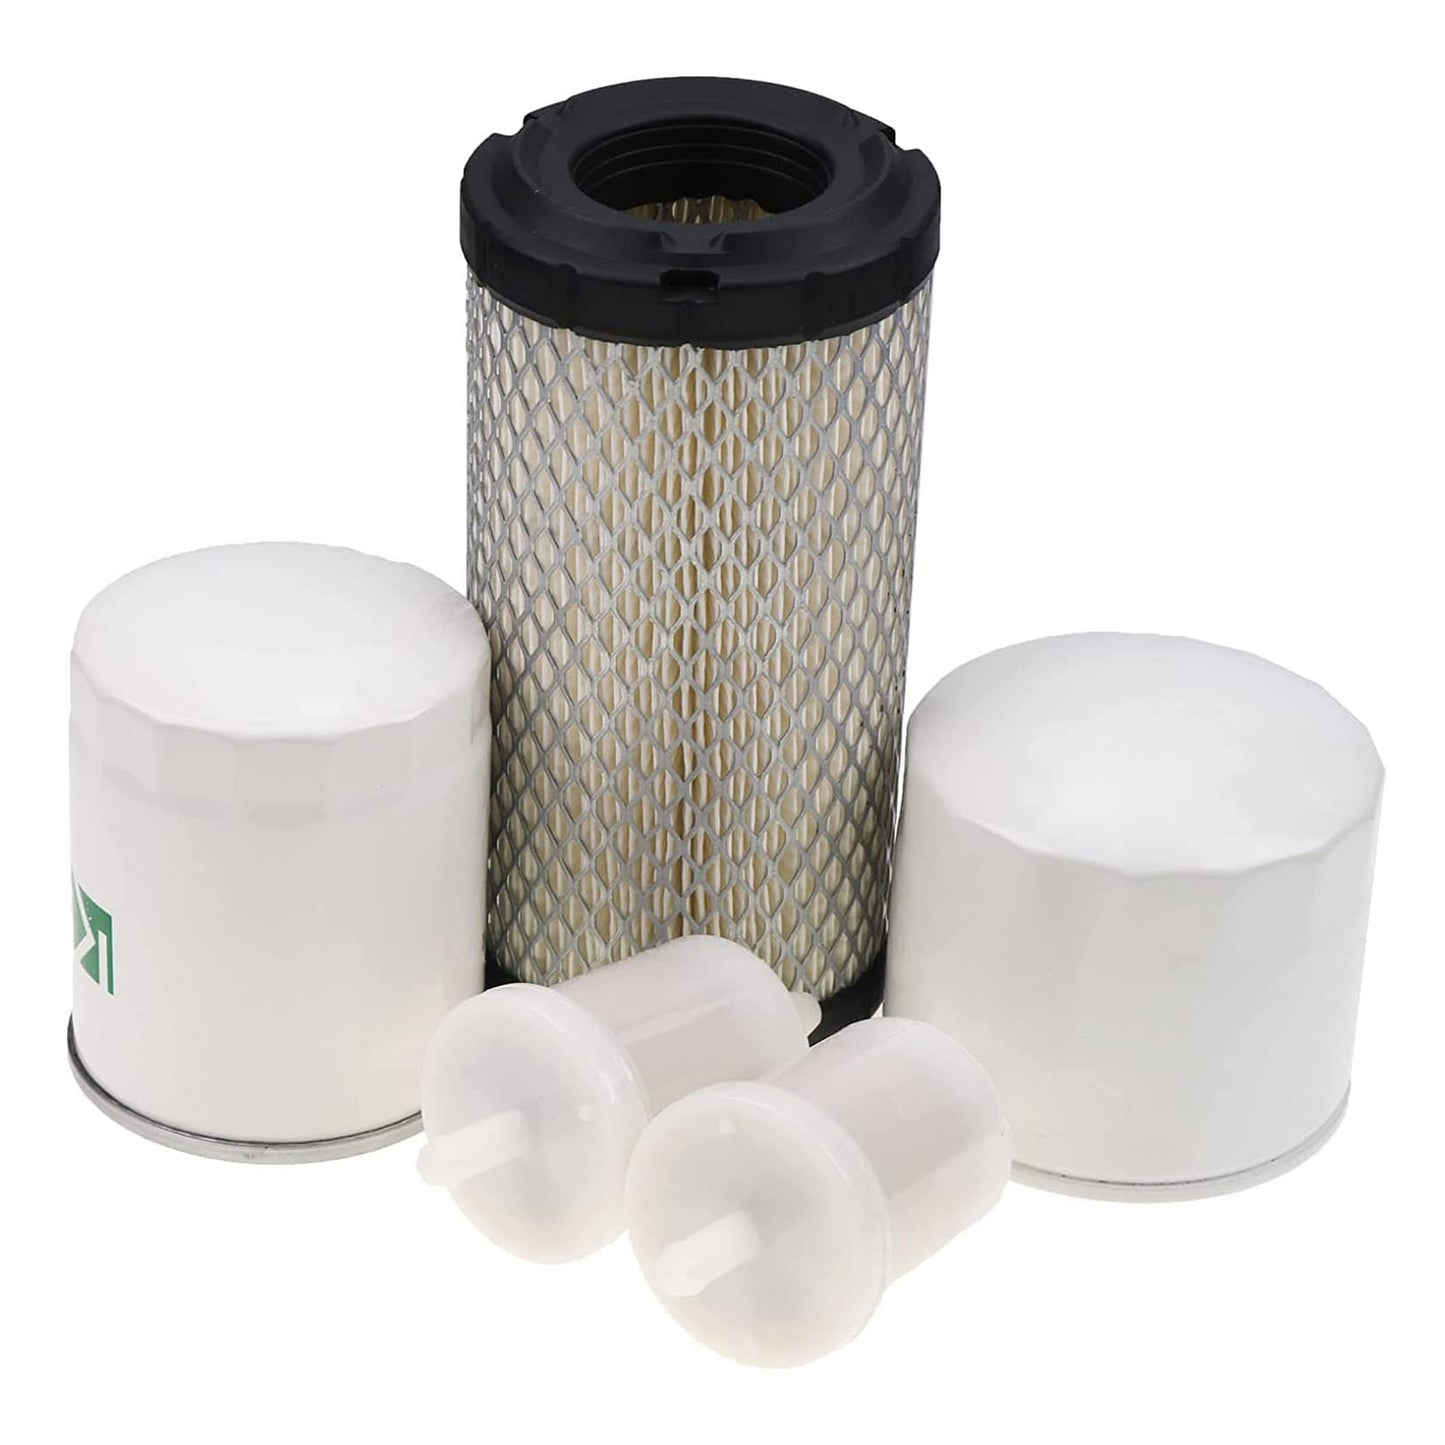 New Filter Kit Compatible with Kubota BX2200 BX2230 BX2350 BX2360 BX2370 BX2660 BX2670 BX22 BX23 BX24 BX25 BX25DLB ZD18 ZD21 ZD25 ZD28 GR2100 GR2110 GR2120